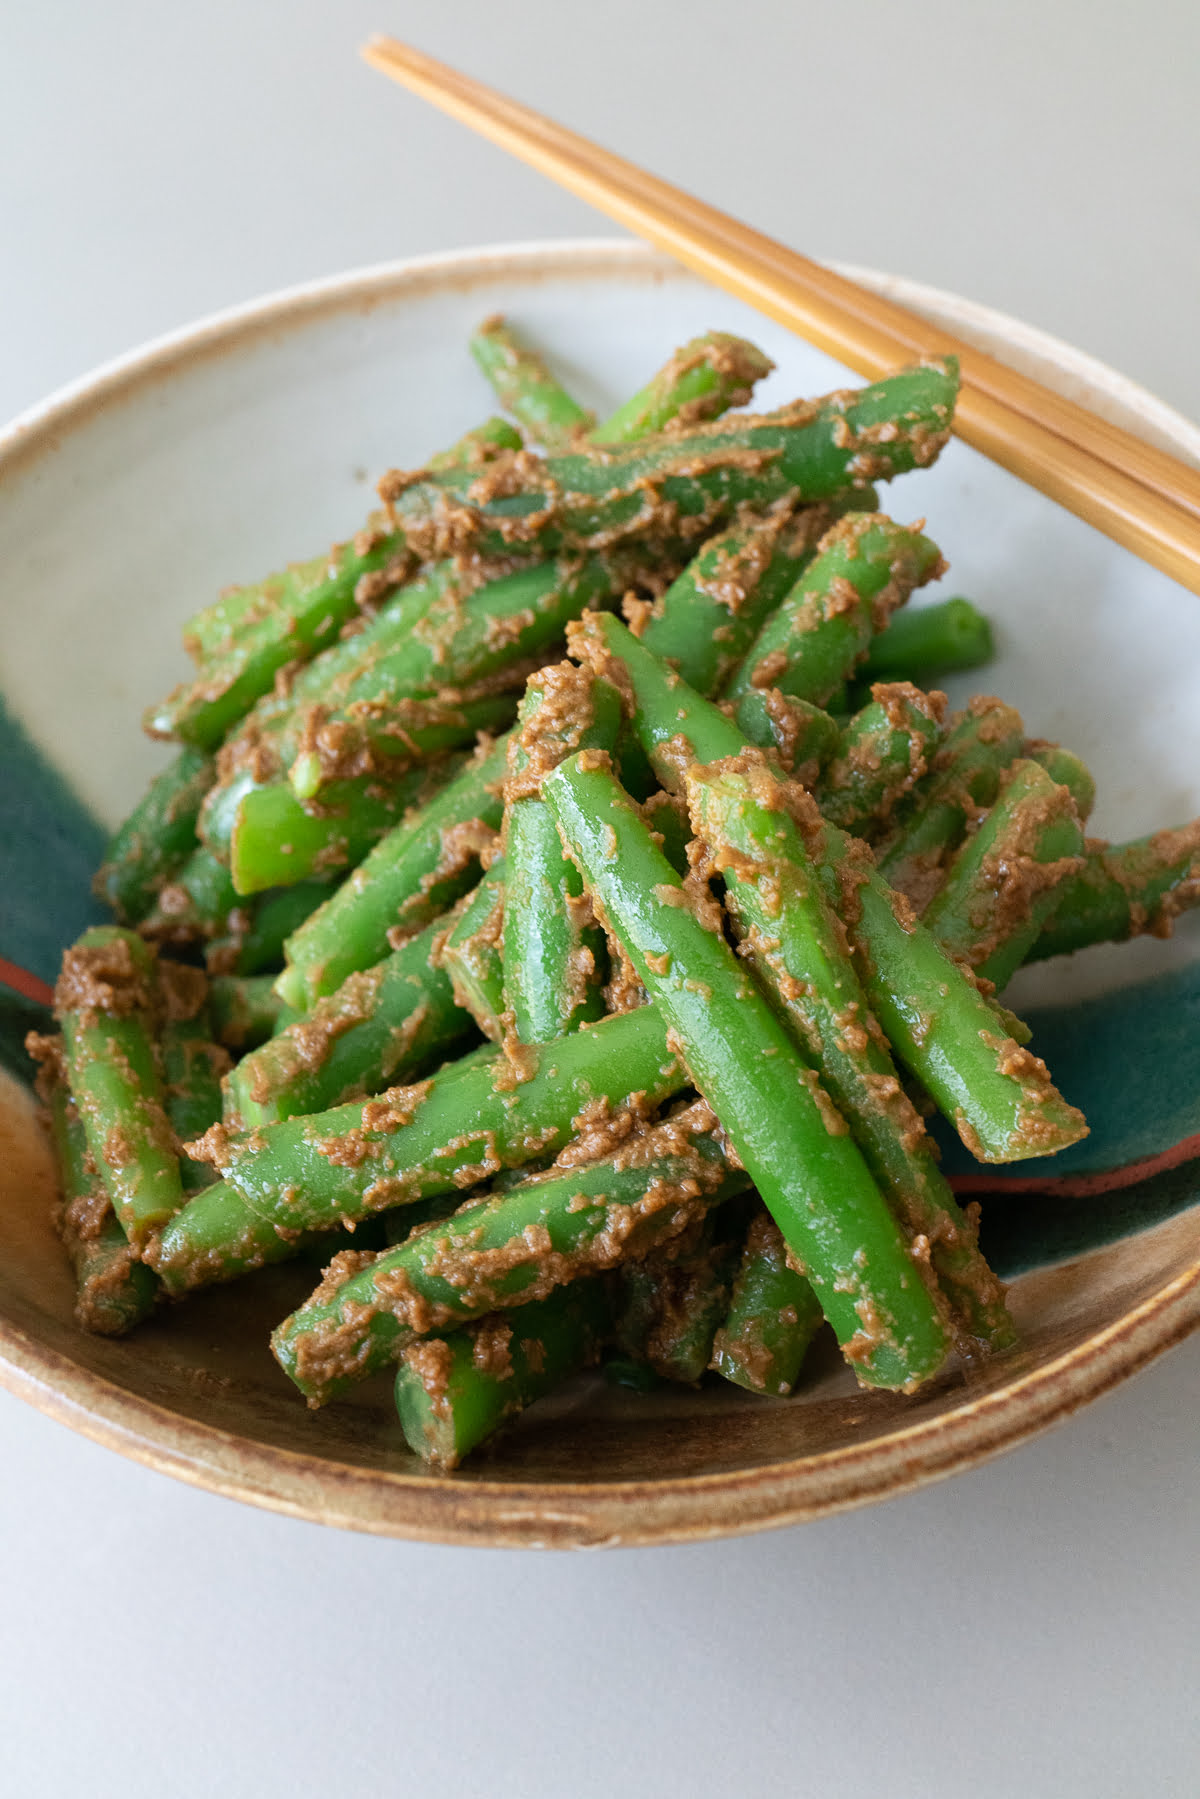 A dish of Green Beans with Sesame Dressing (Gomaae).